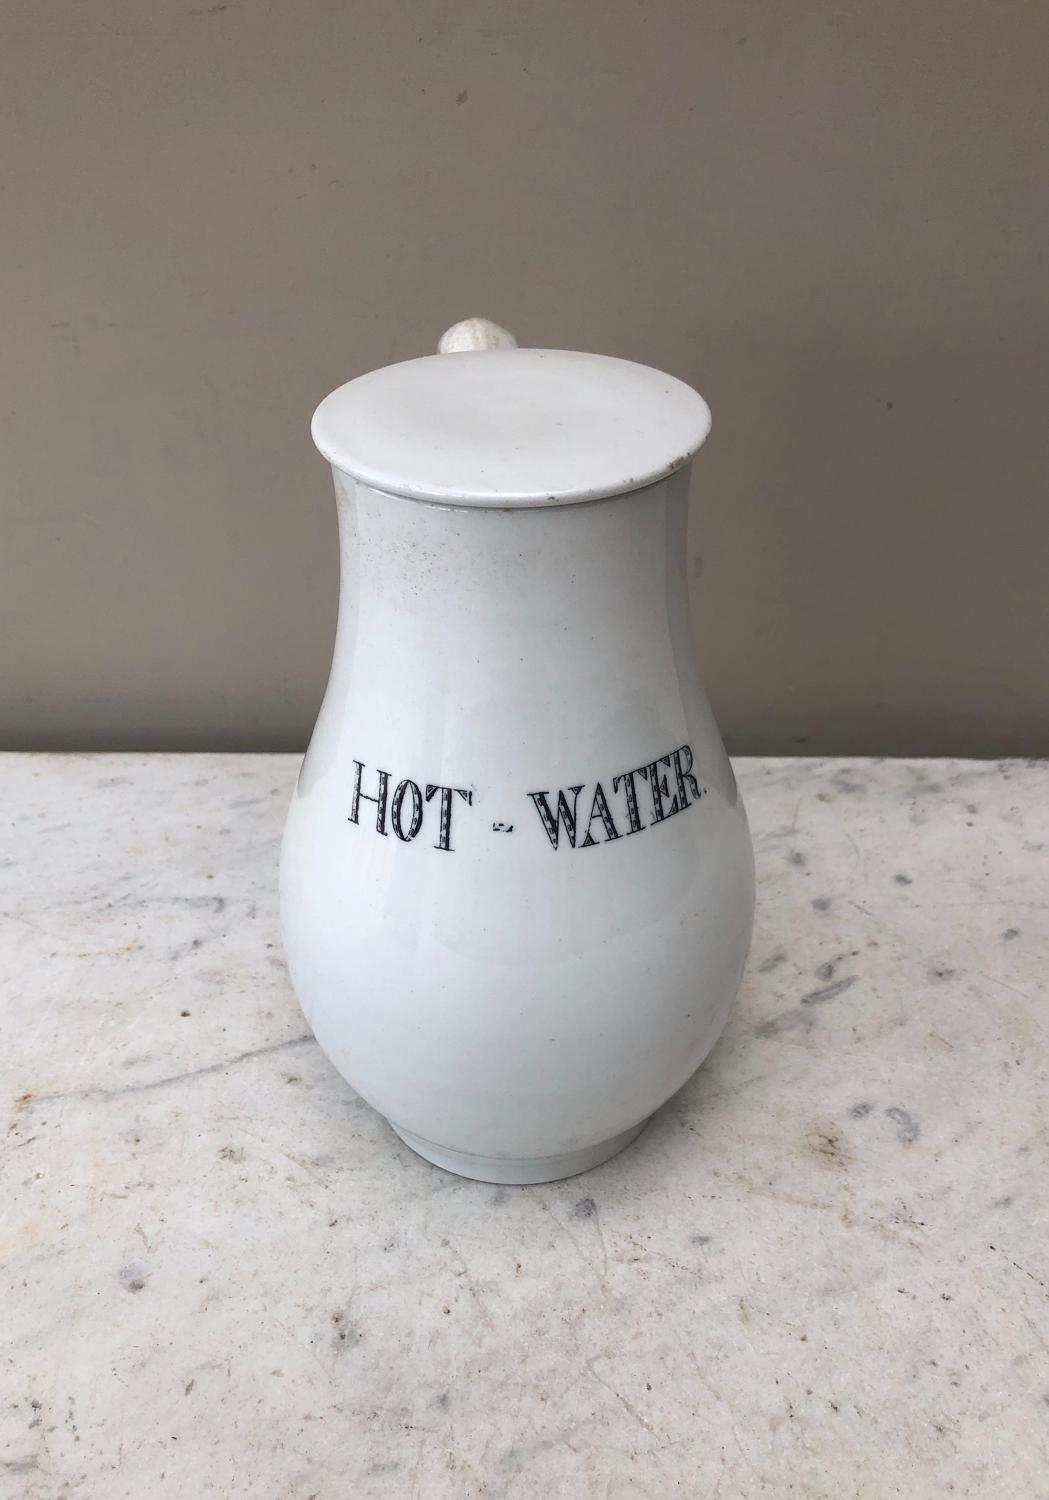 Rare Late Victorian White Ironstone Hot Water Jug with Original Lid